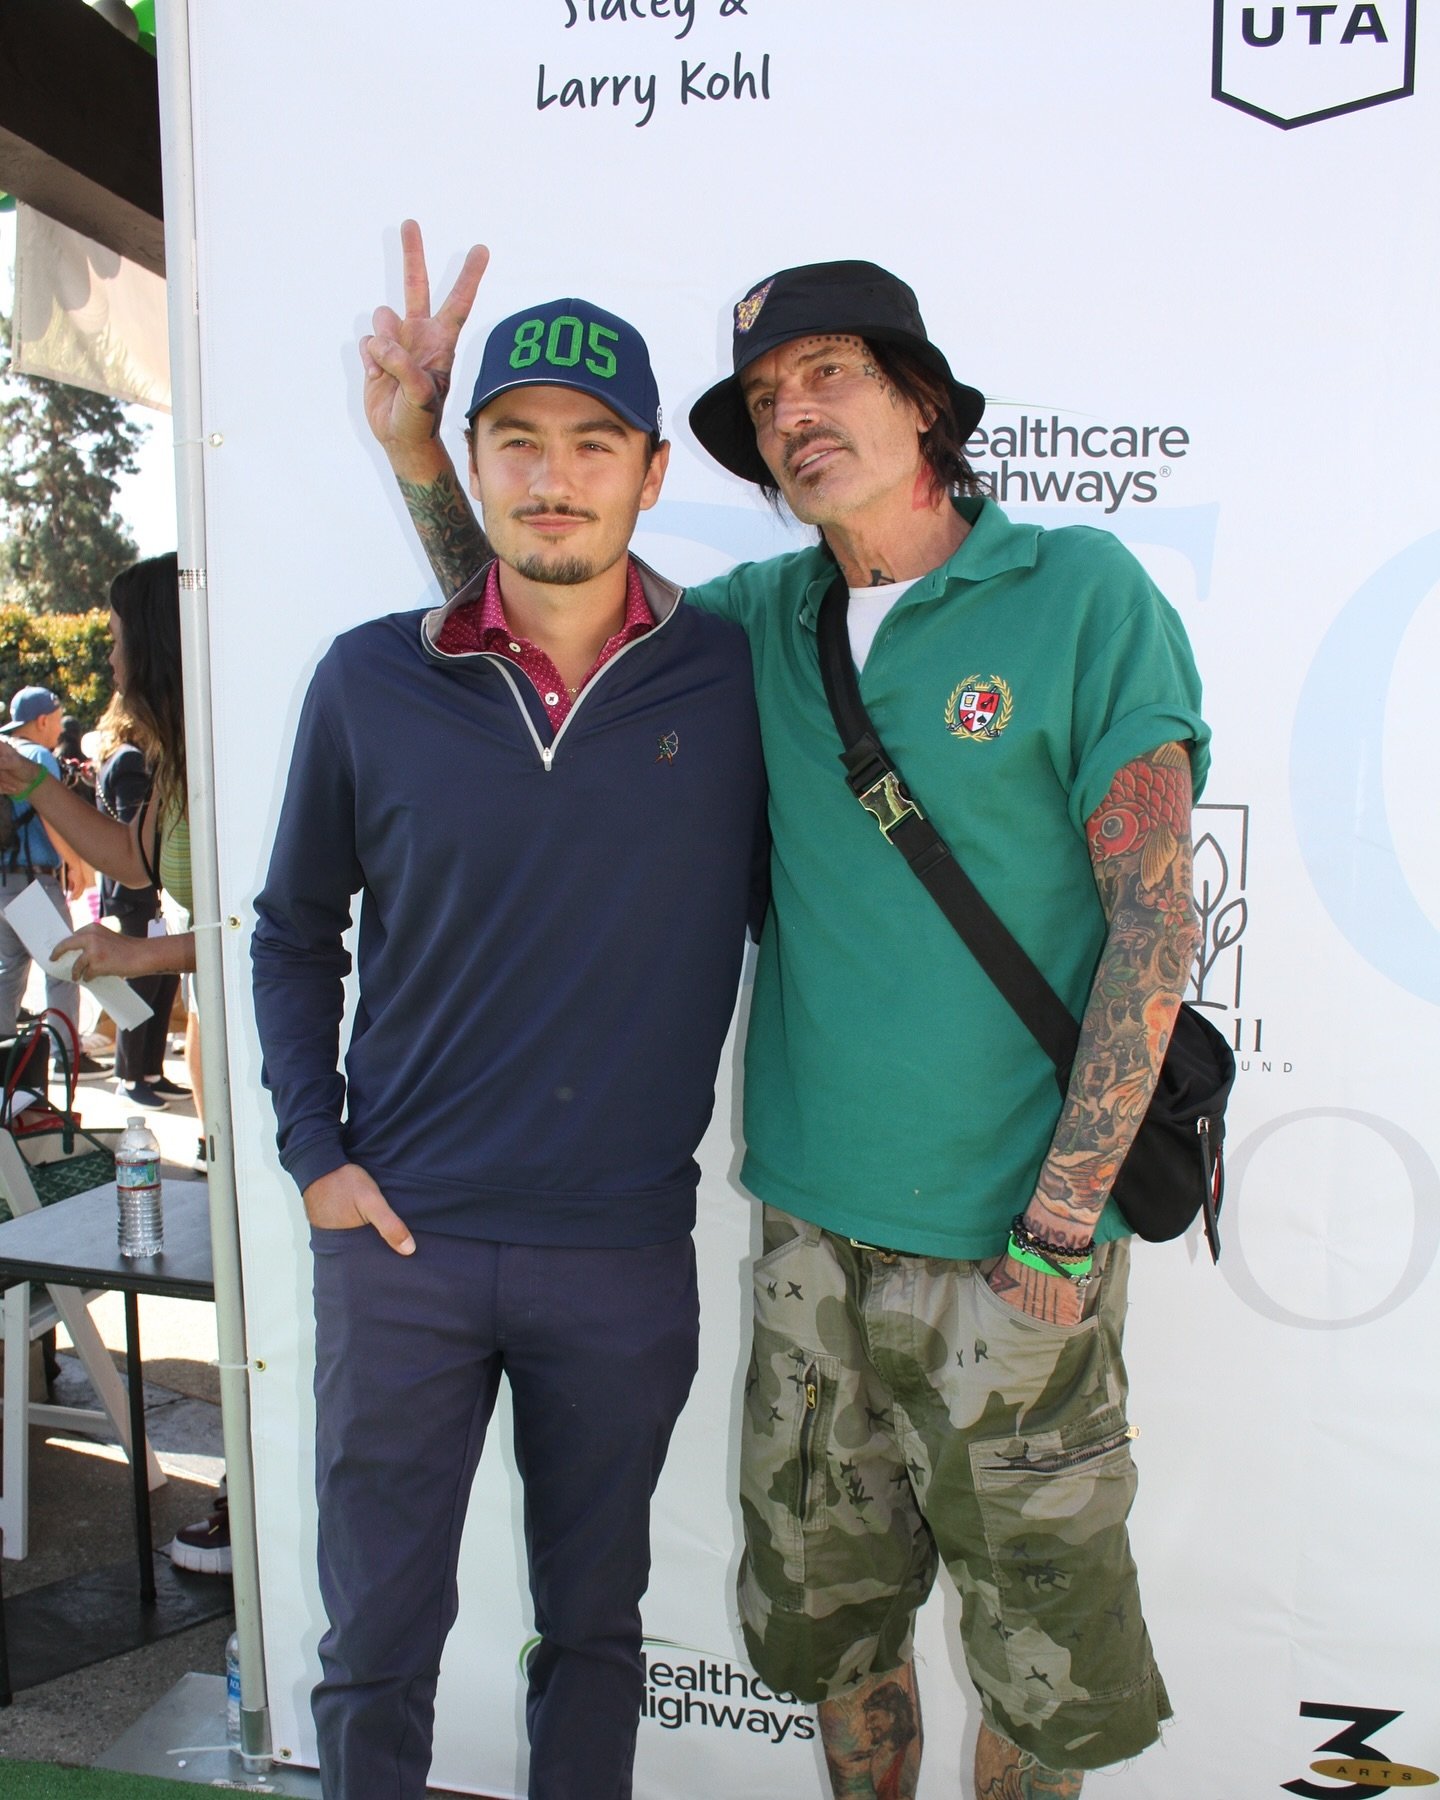 Thank you @brandonthomaslee and @tommylee for supporting this year&rsquo;s 17th Annual George Lopez Celebrity Golf Classic!! #GiveBack #BrandonThomasLee #TommyLee #GeorgeLopez #GeorgeLopezCharityFDN #ForeKidneyHealth #raiseawareness #kidneydisease #o